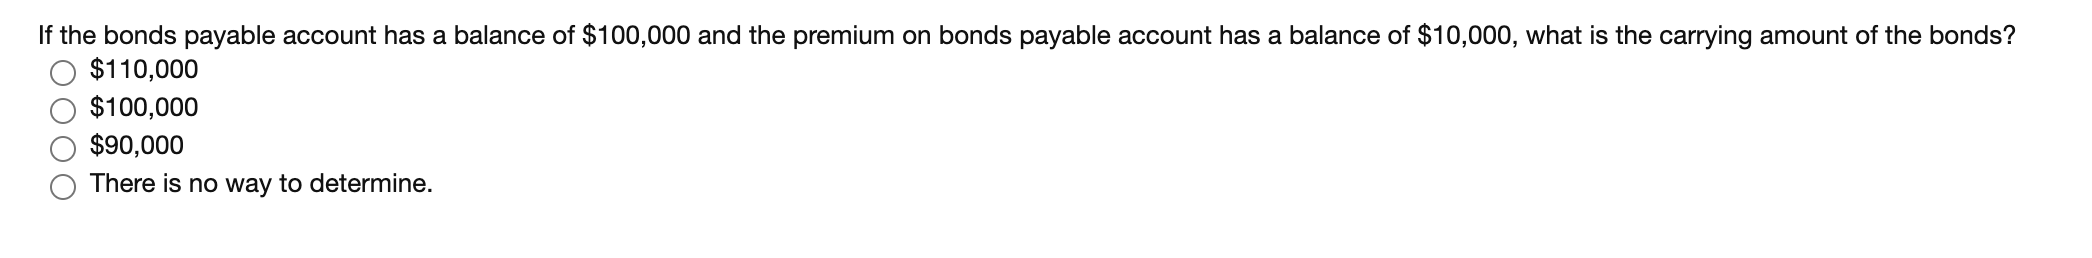 If the bonds payable account has a balance of $100,000 and the premium on bonds payable account has a balance of $10,000, what is the carrying amount of the bonds?
$110,000
$100,000
$90,000
There is no way to determine.
